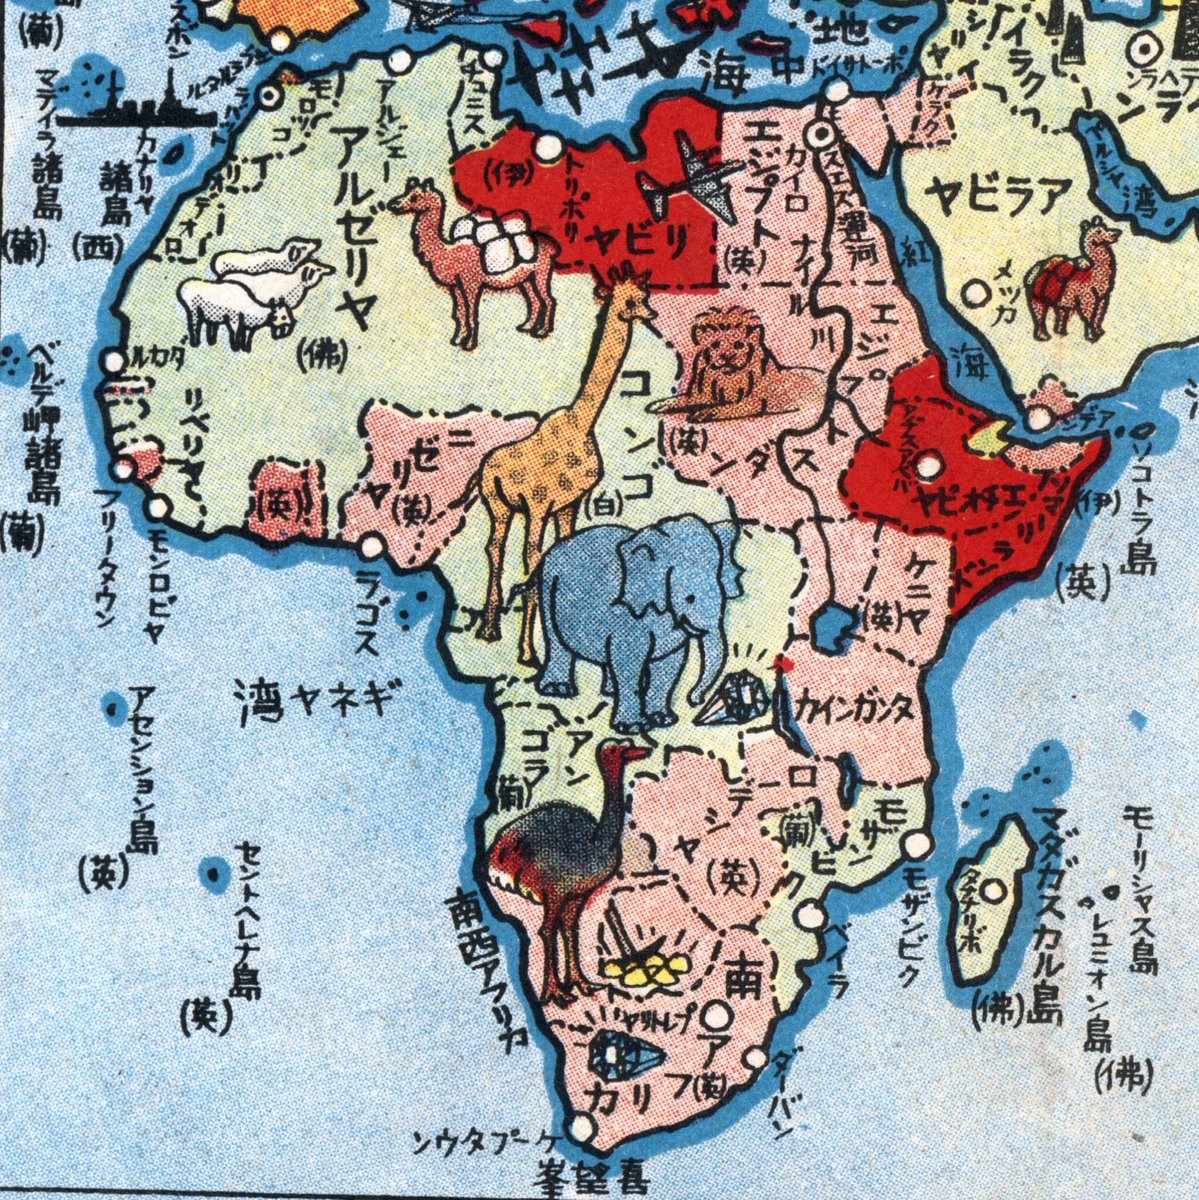 Japanese pictorial map of Africa from 1942